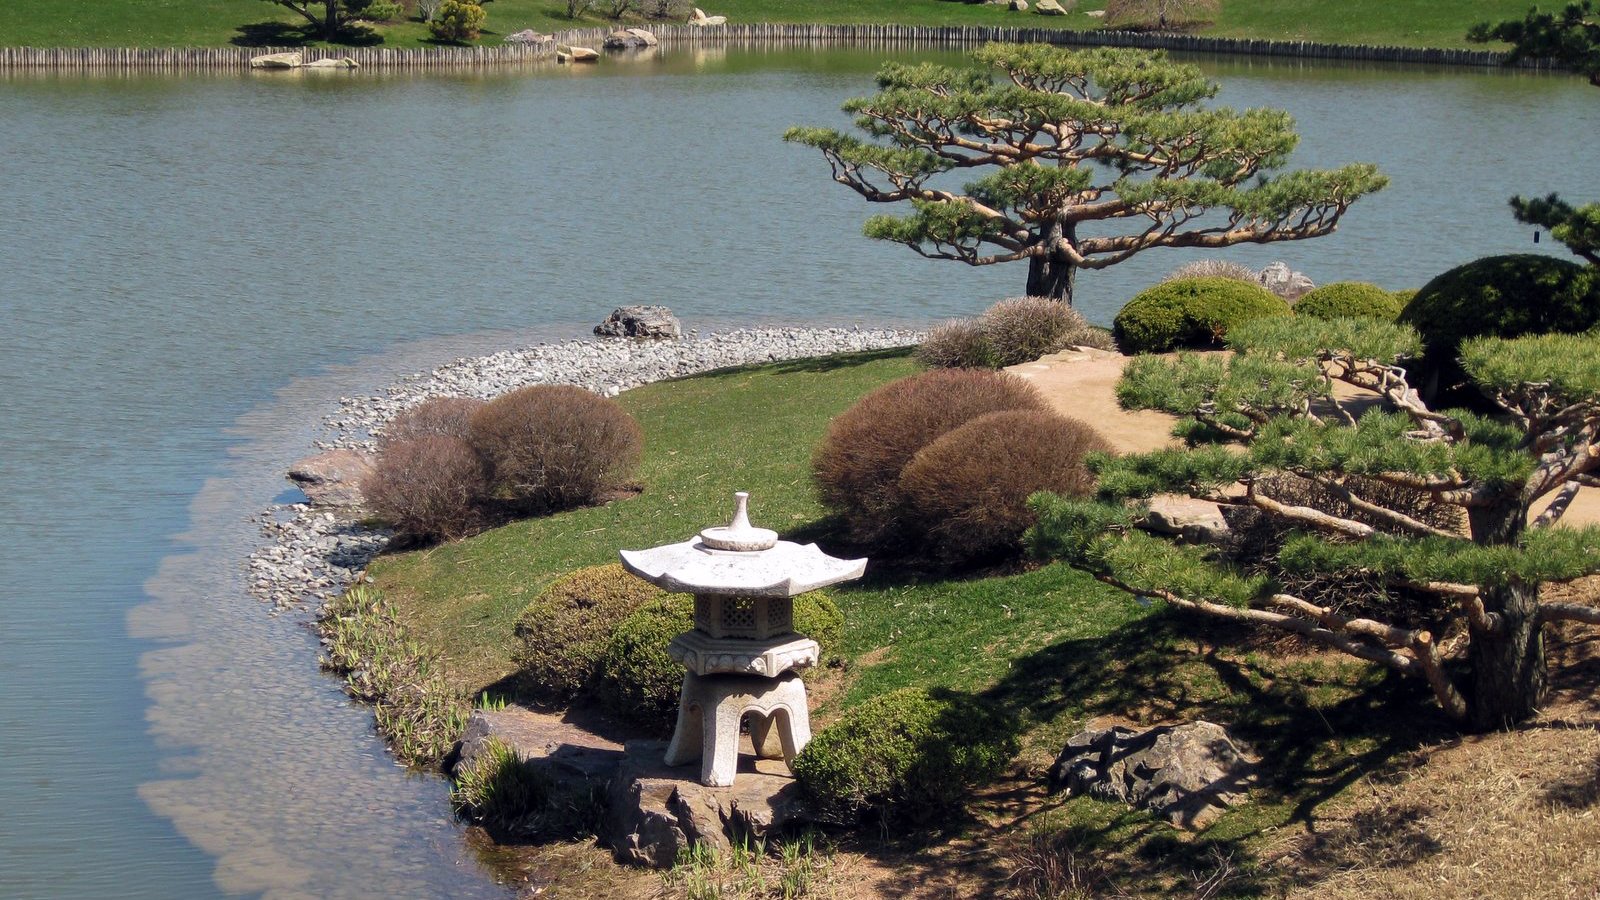 A tranquil view of the Japanese Garden at the Chicago Botanic Garden (Photo: michaeltk)